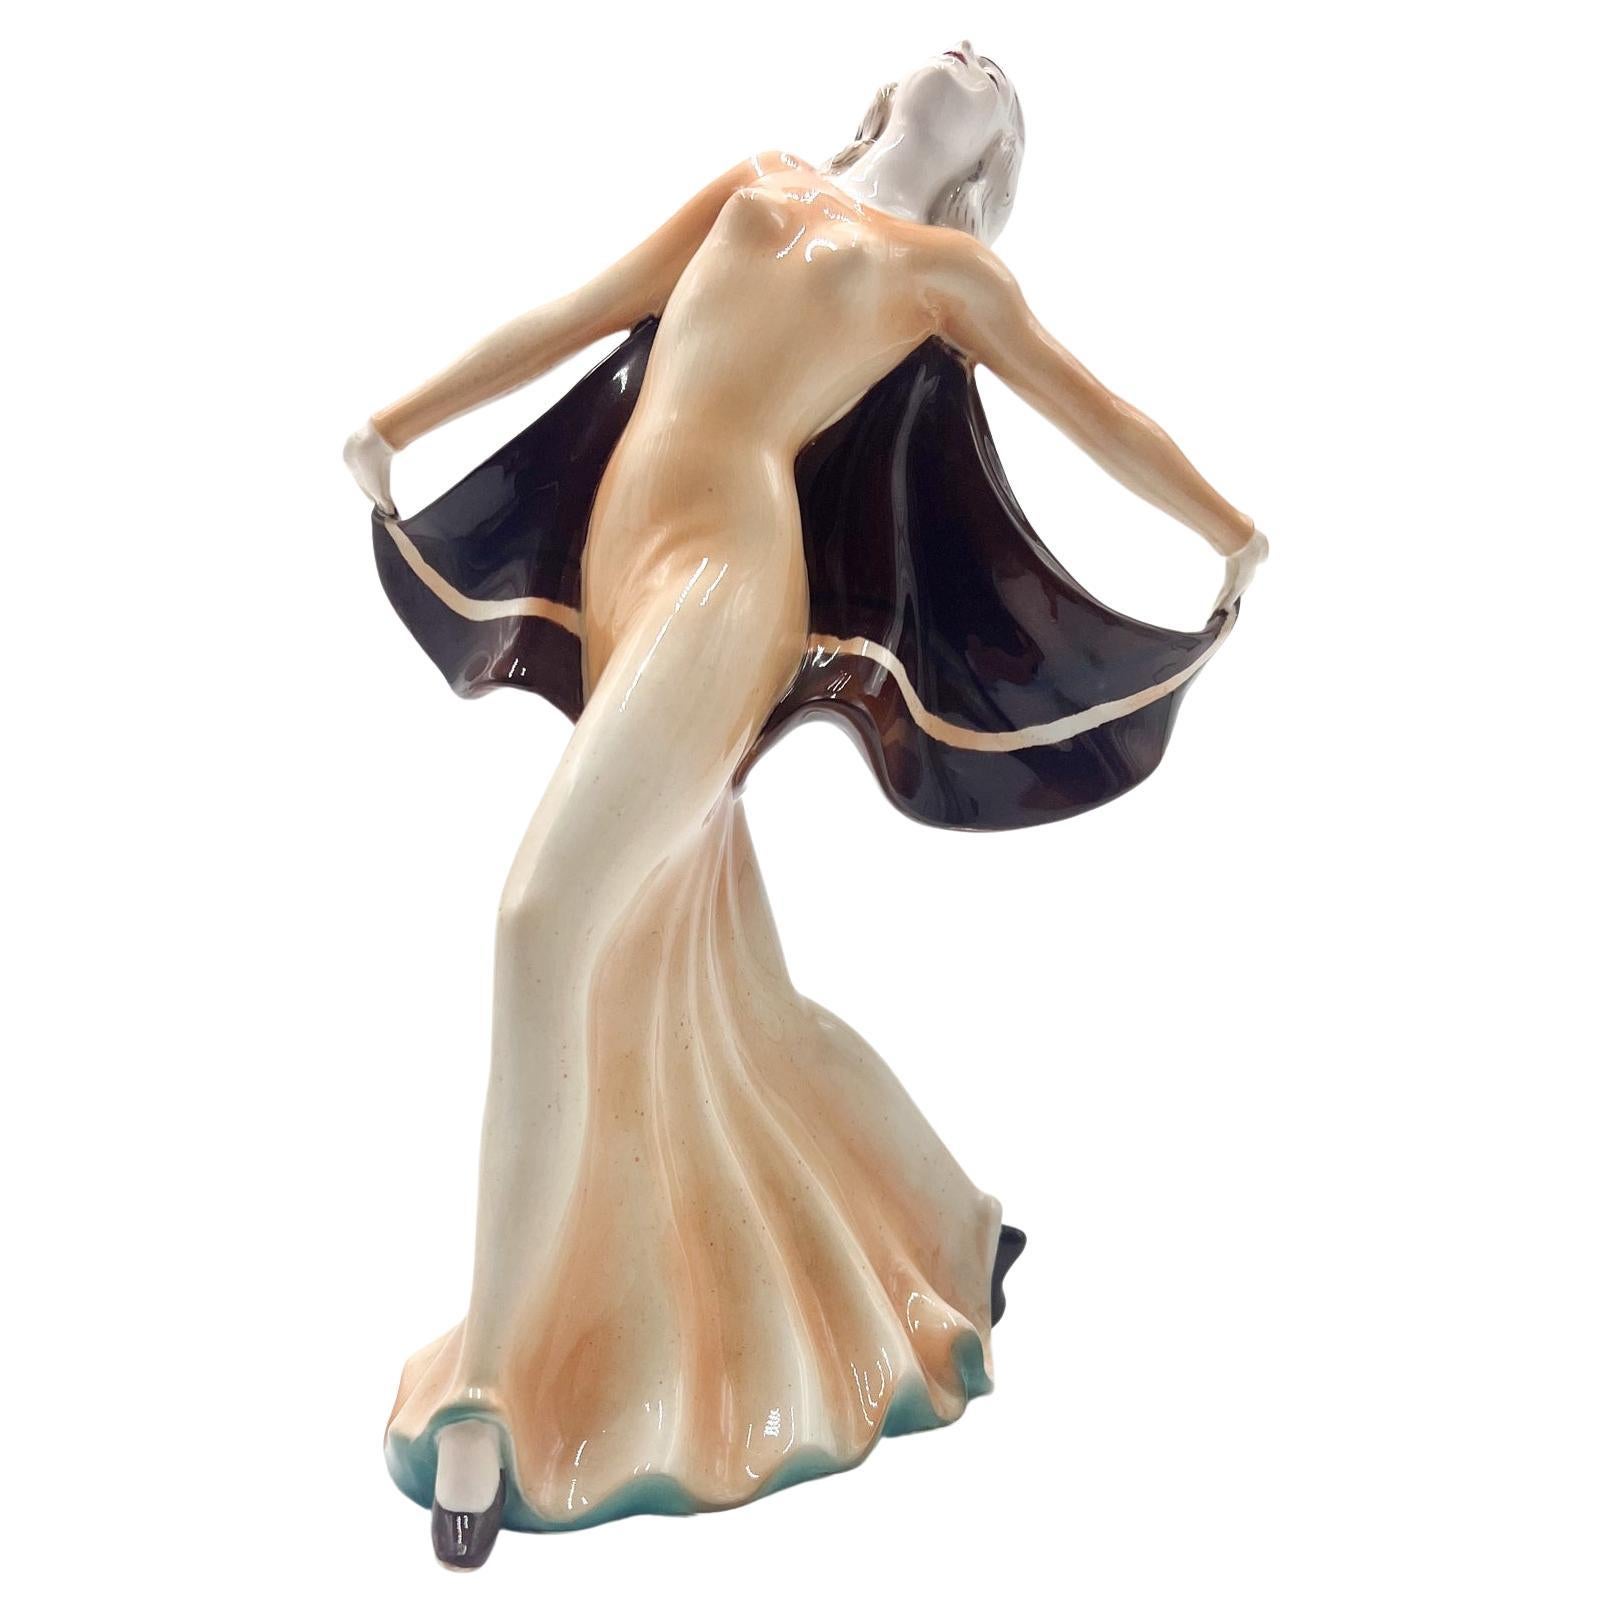 Ceramic Figurine of a Decò Ballerina from the 1940s For Sale